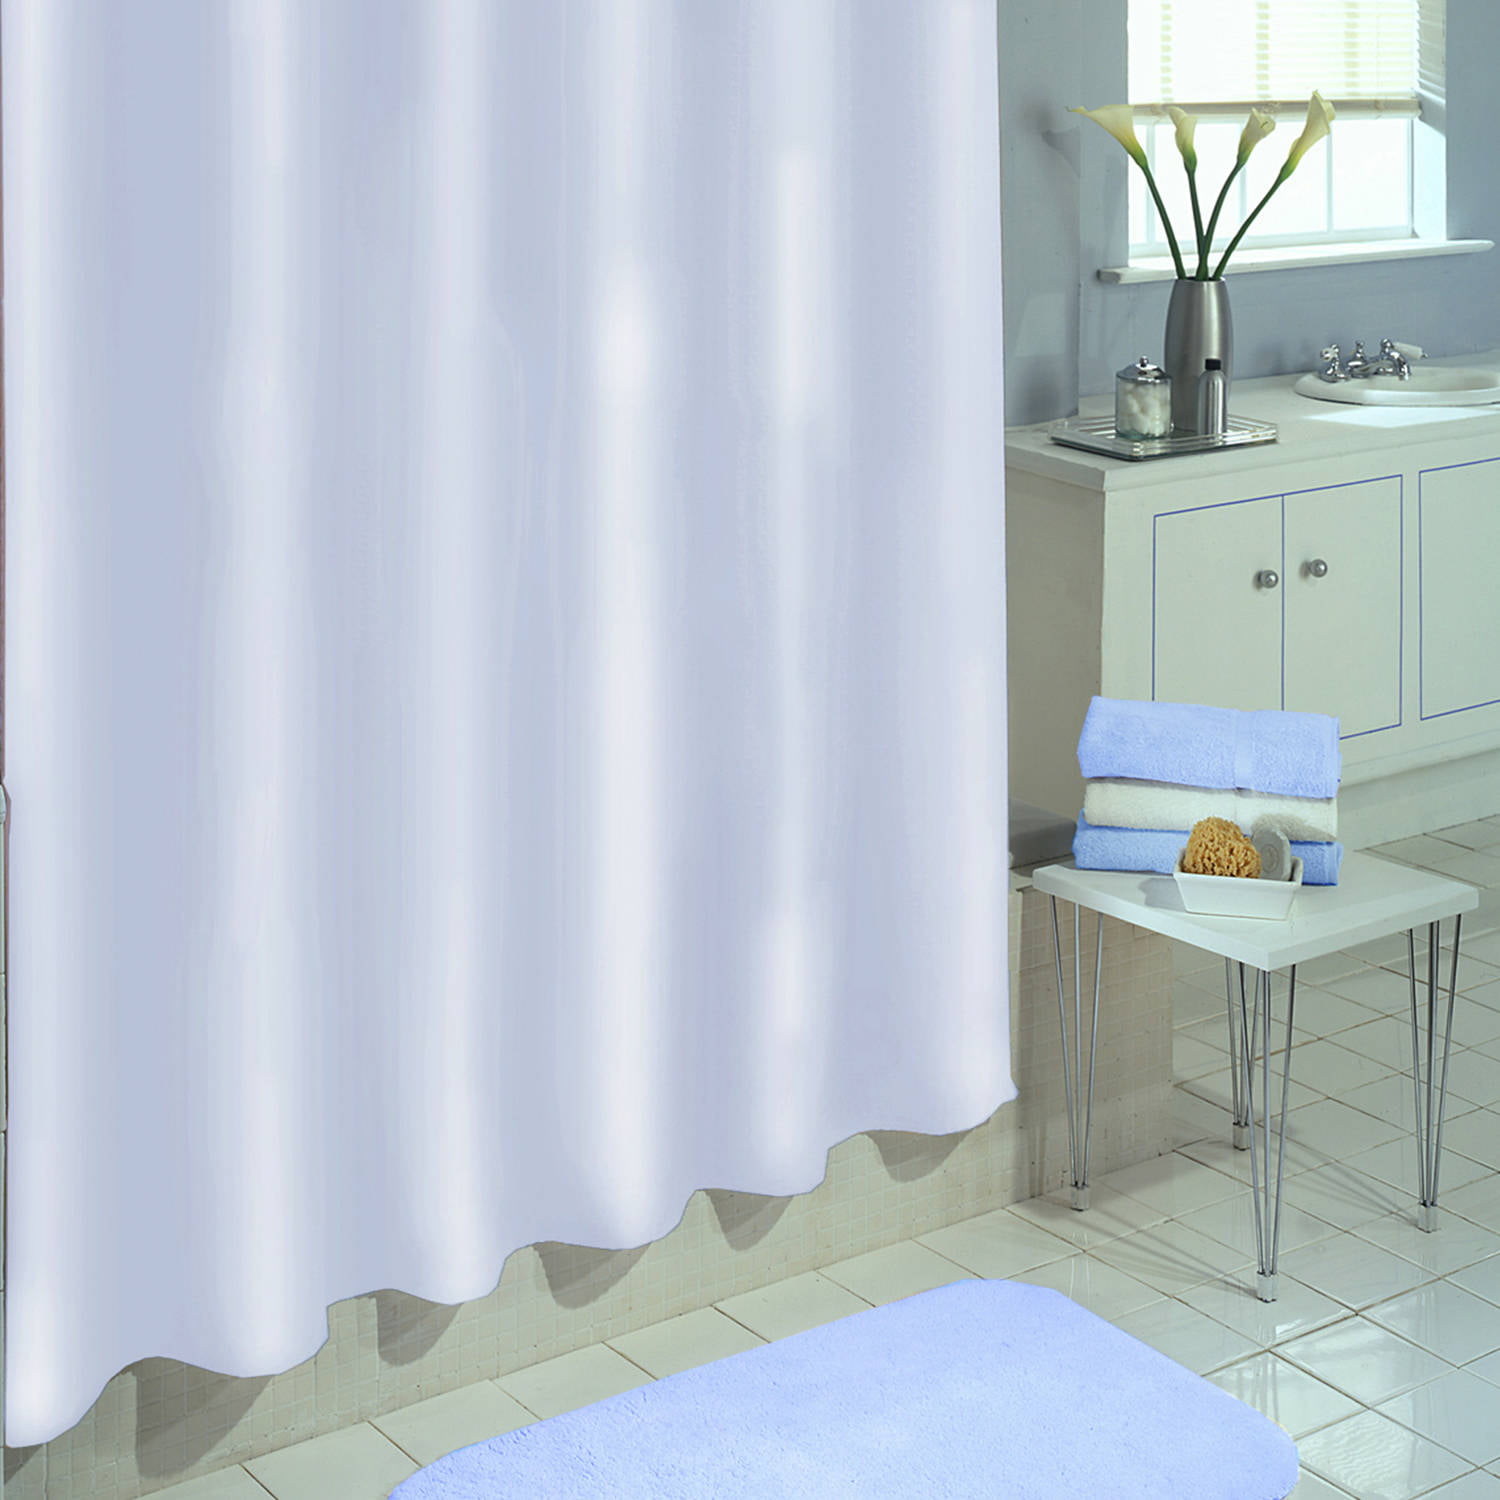 Clear Vinyl Shower Curtain Liner 70 X 71 With Magnets From Splash Home for sale online 